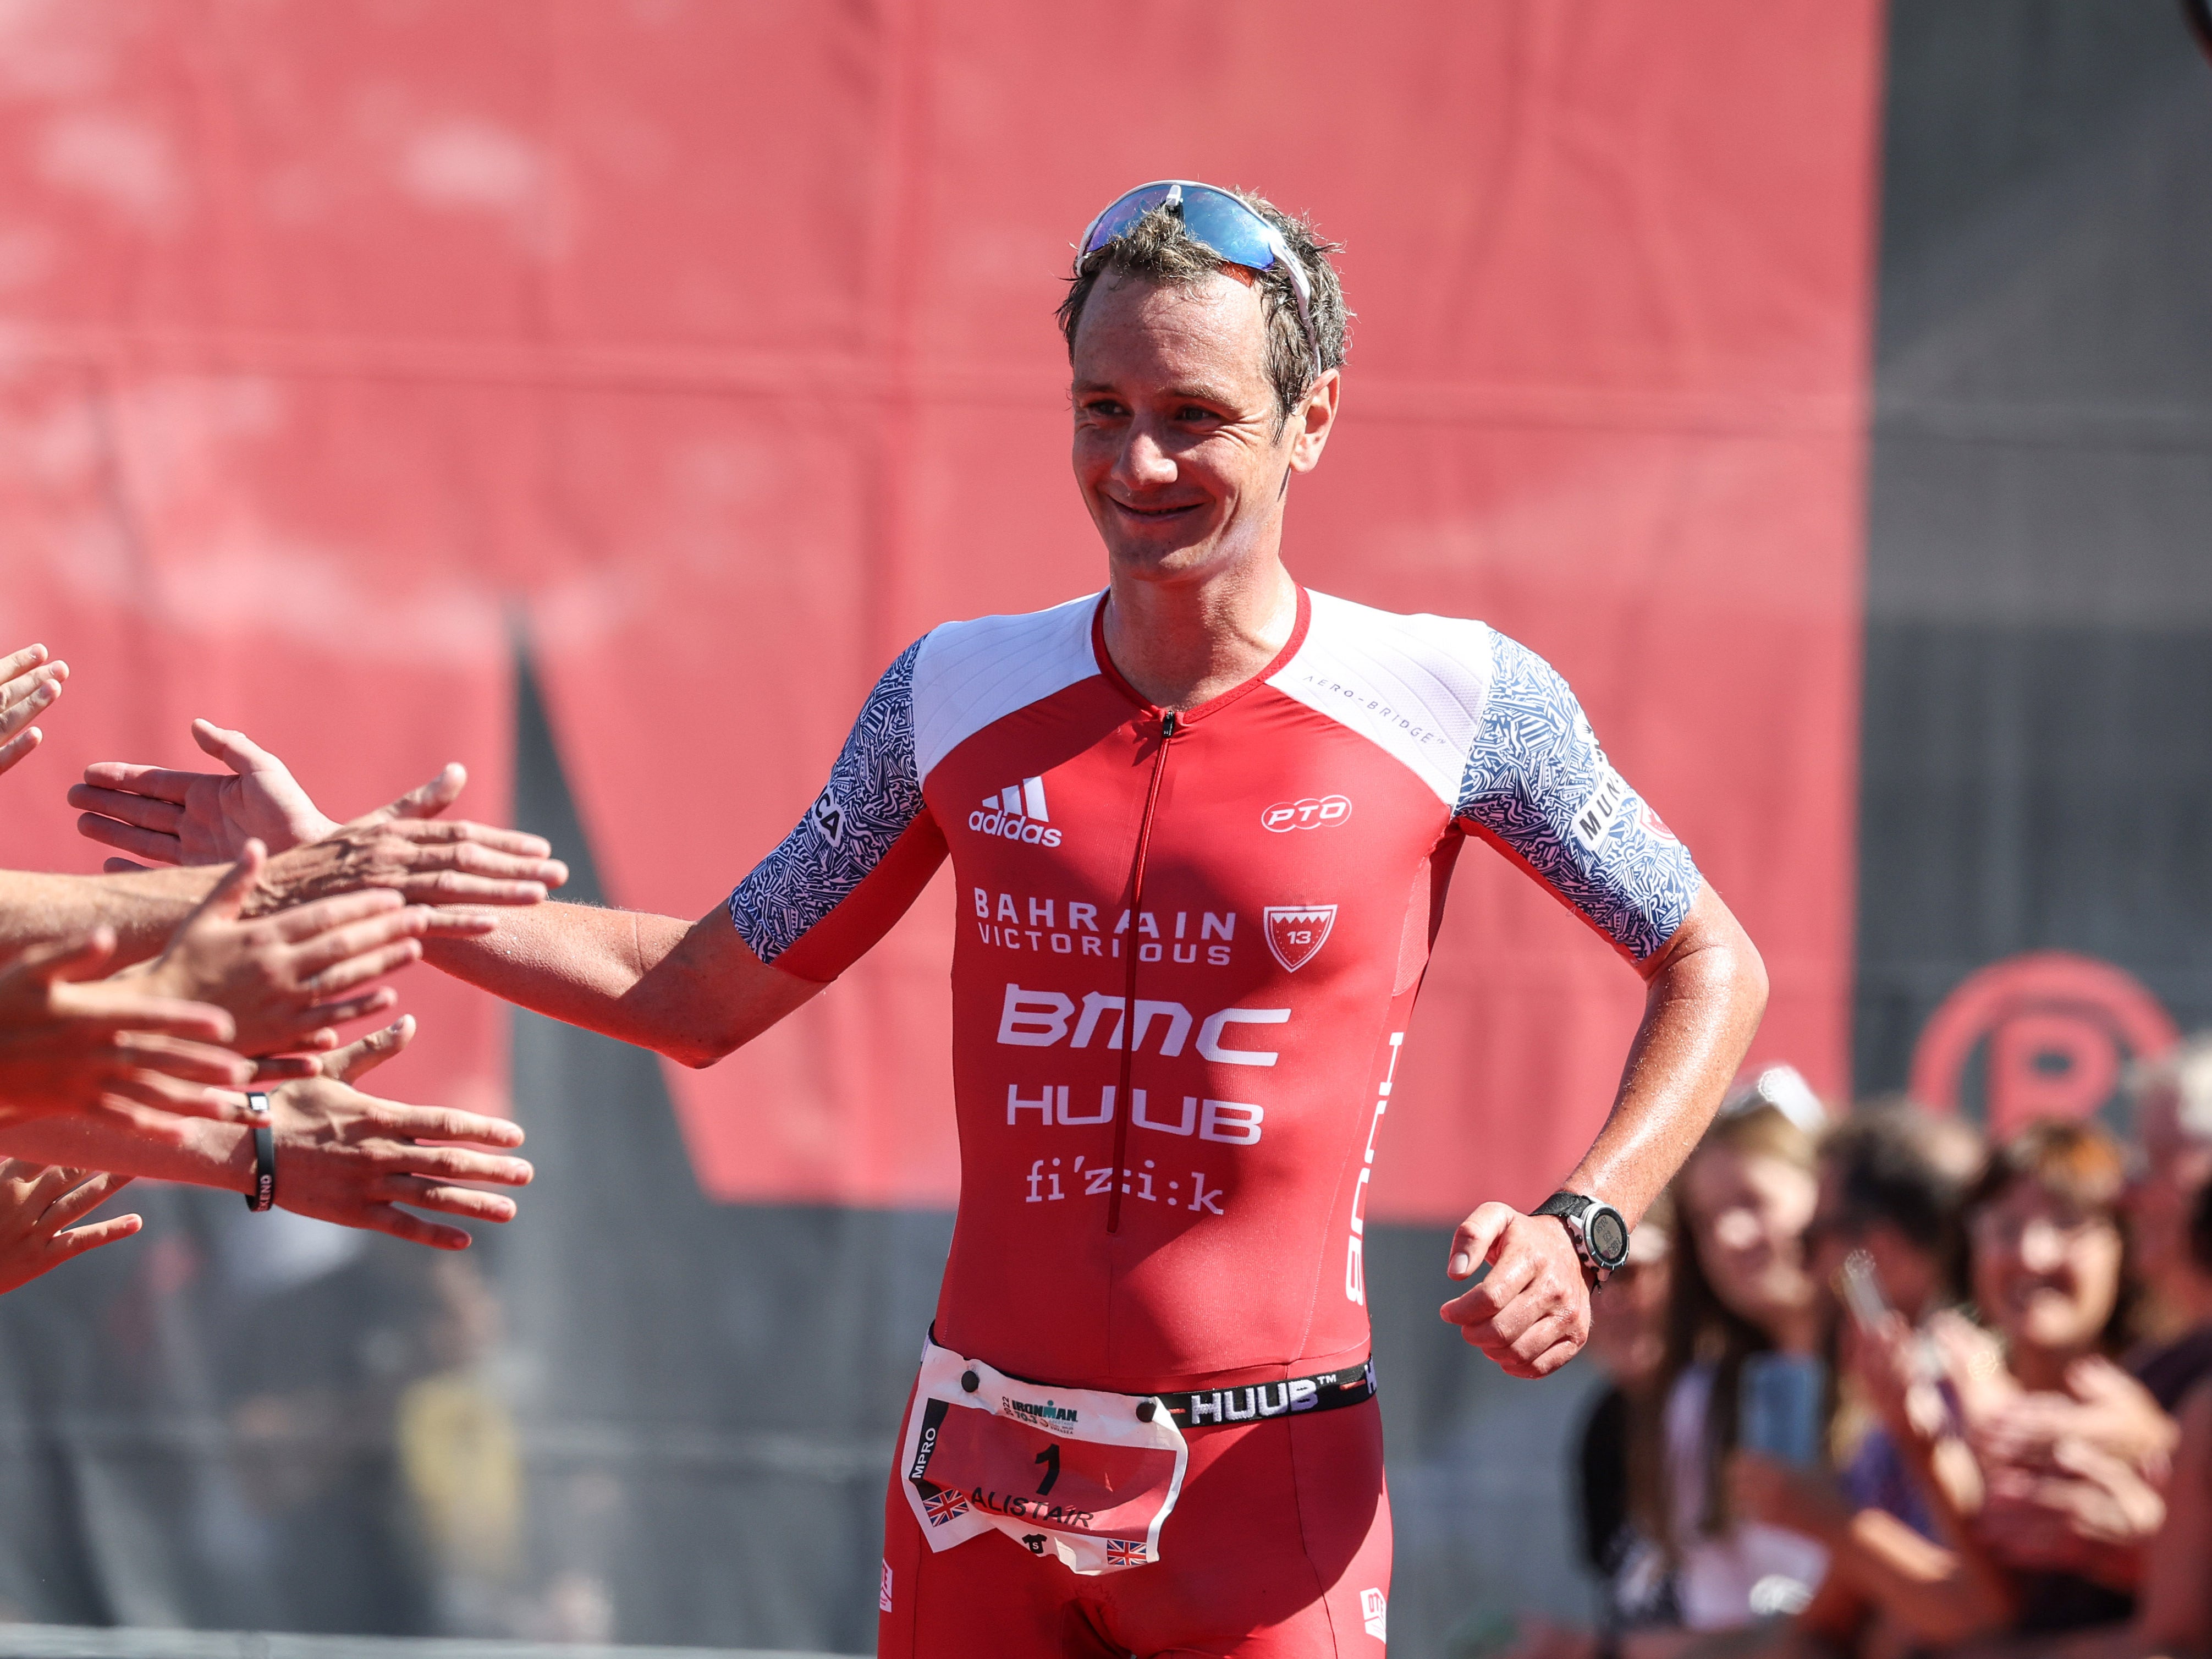 Alistair Brownlee will take on two other Olympic traithlon champions at the European Open